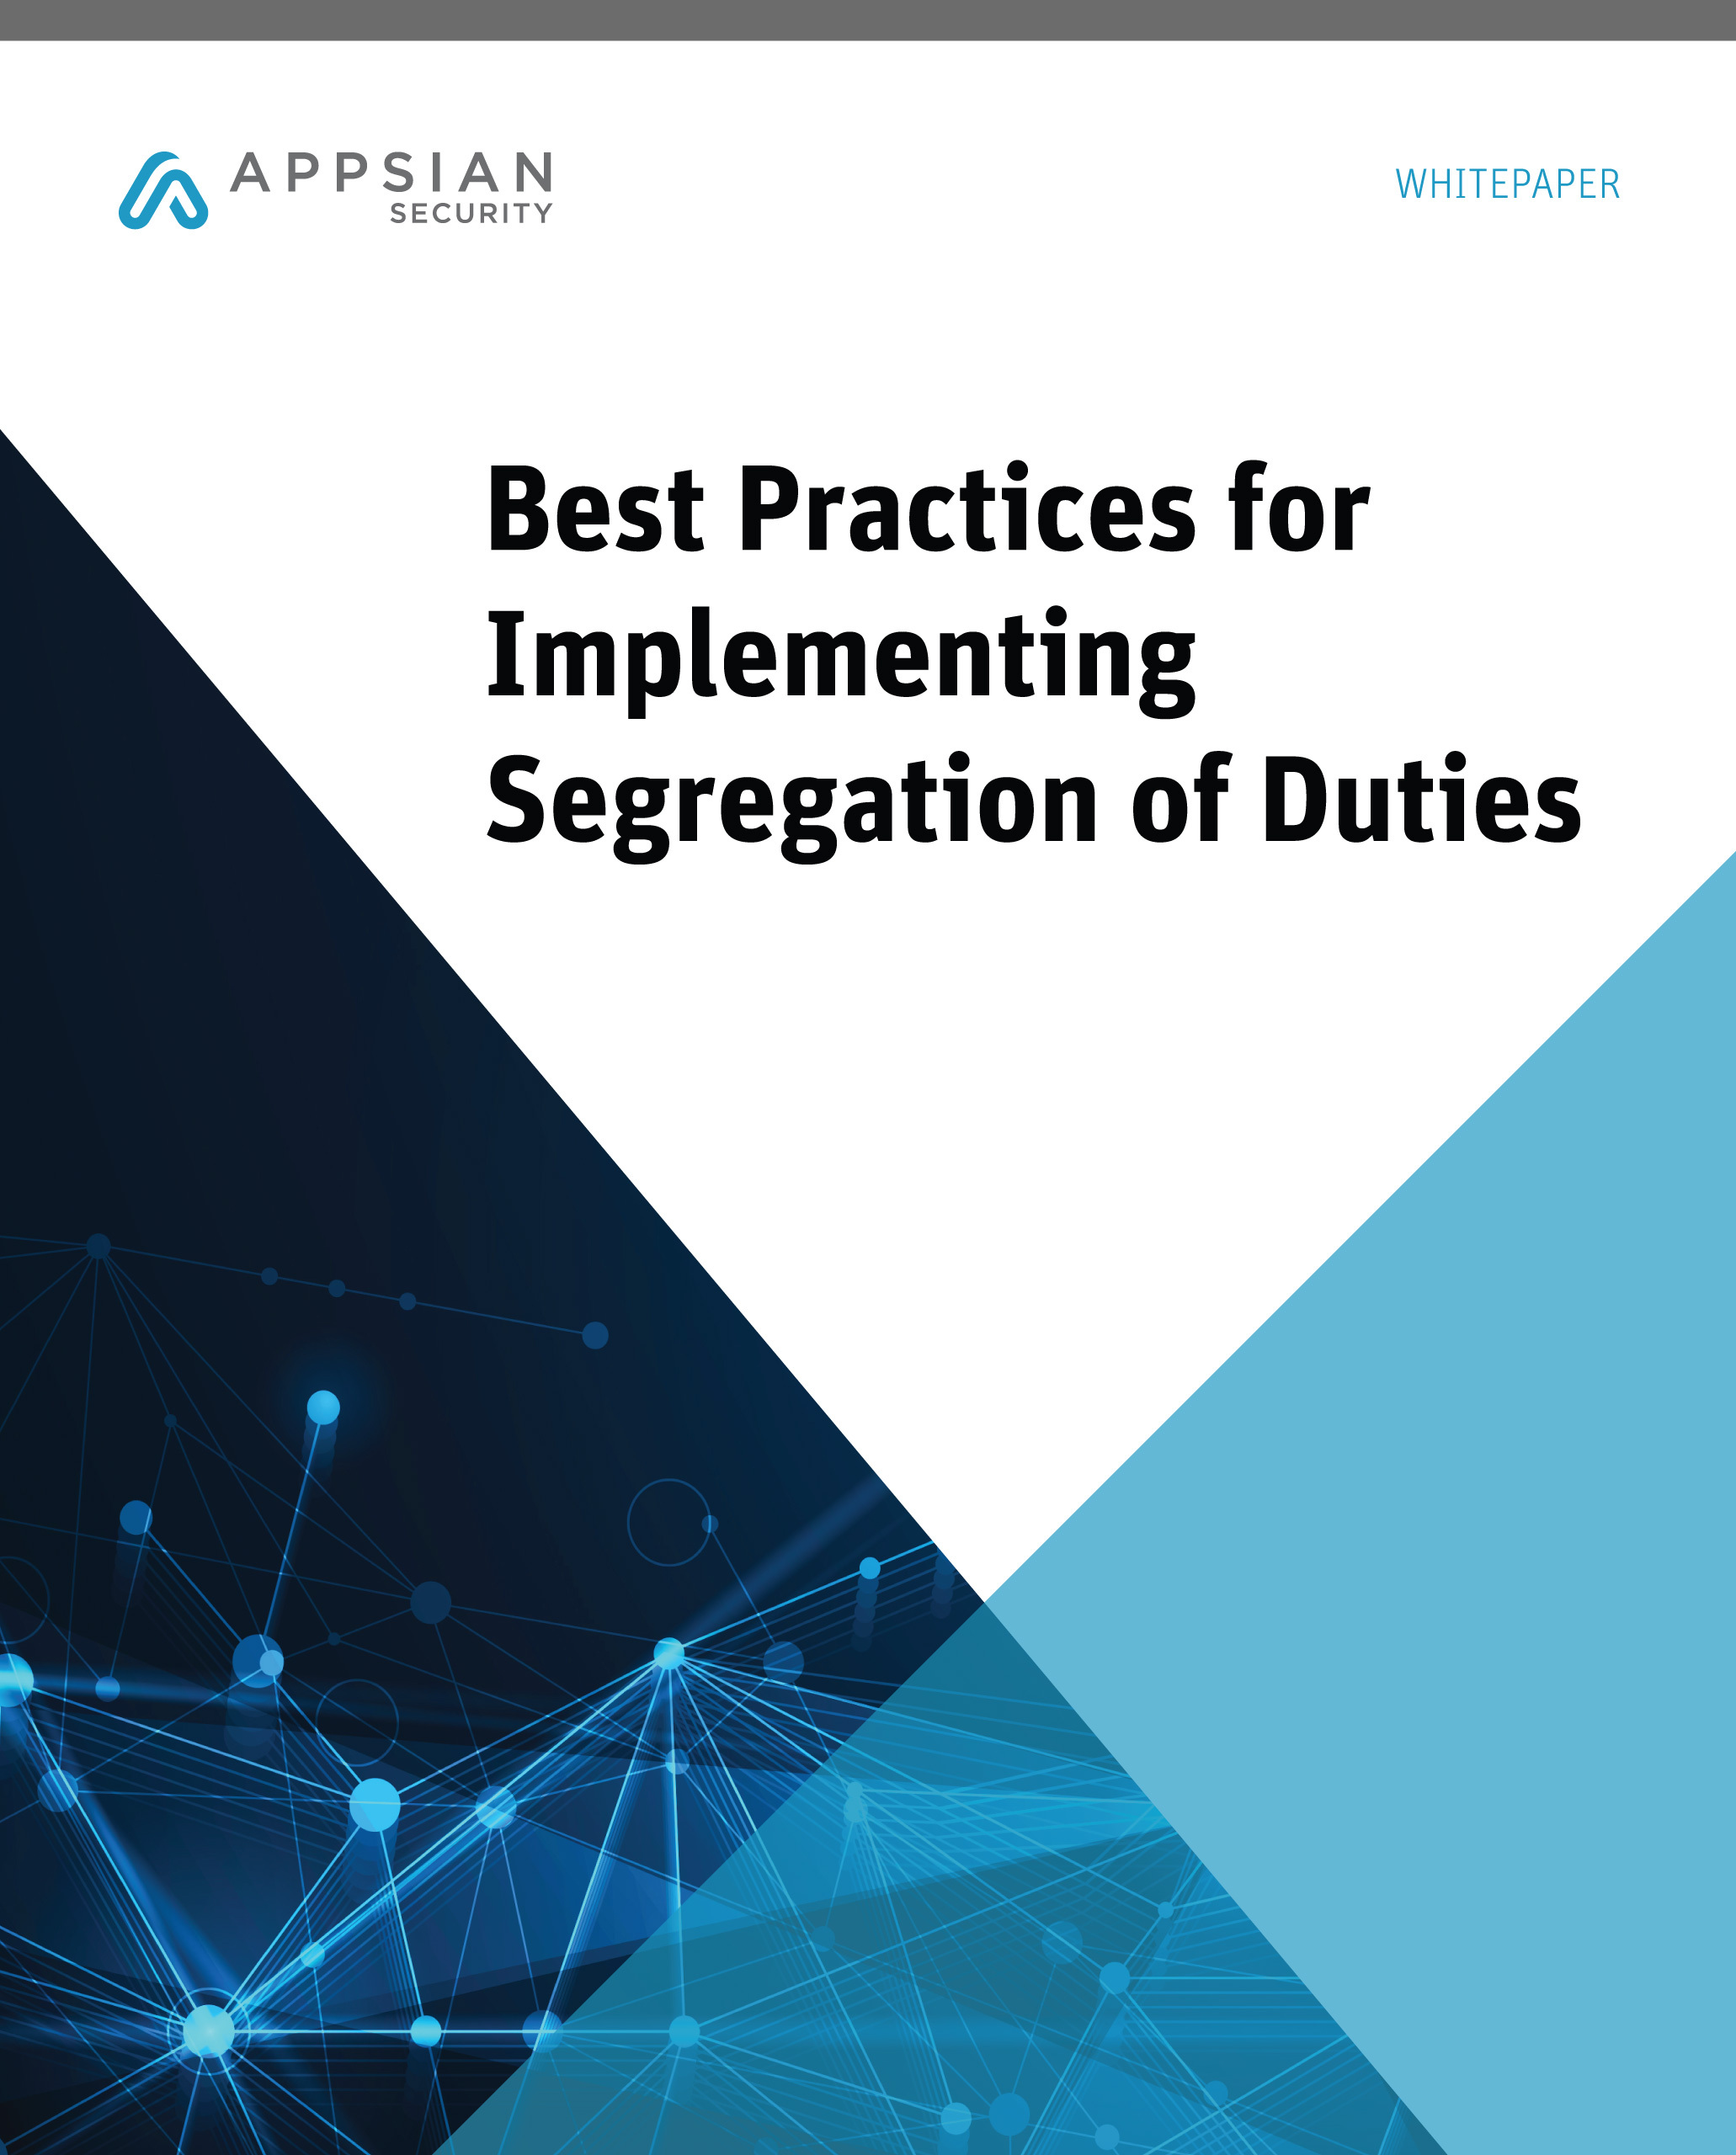 Best Practices for Implementing Segregation of Duties